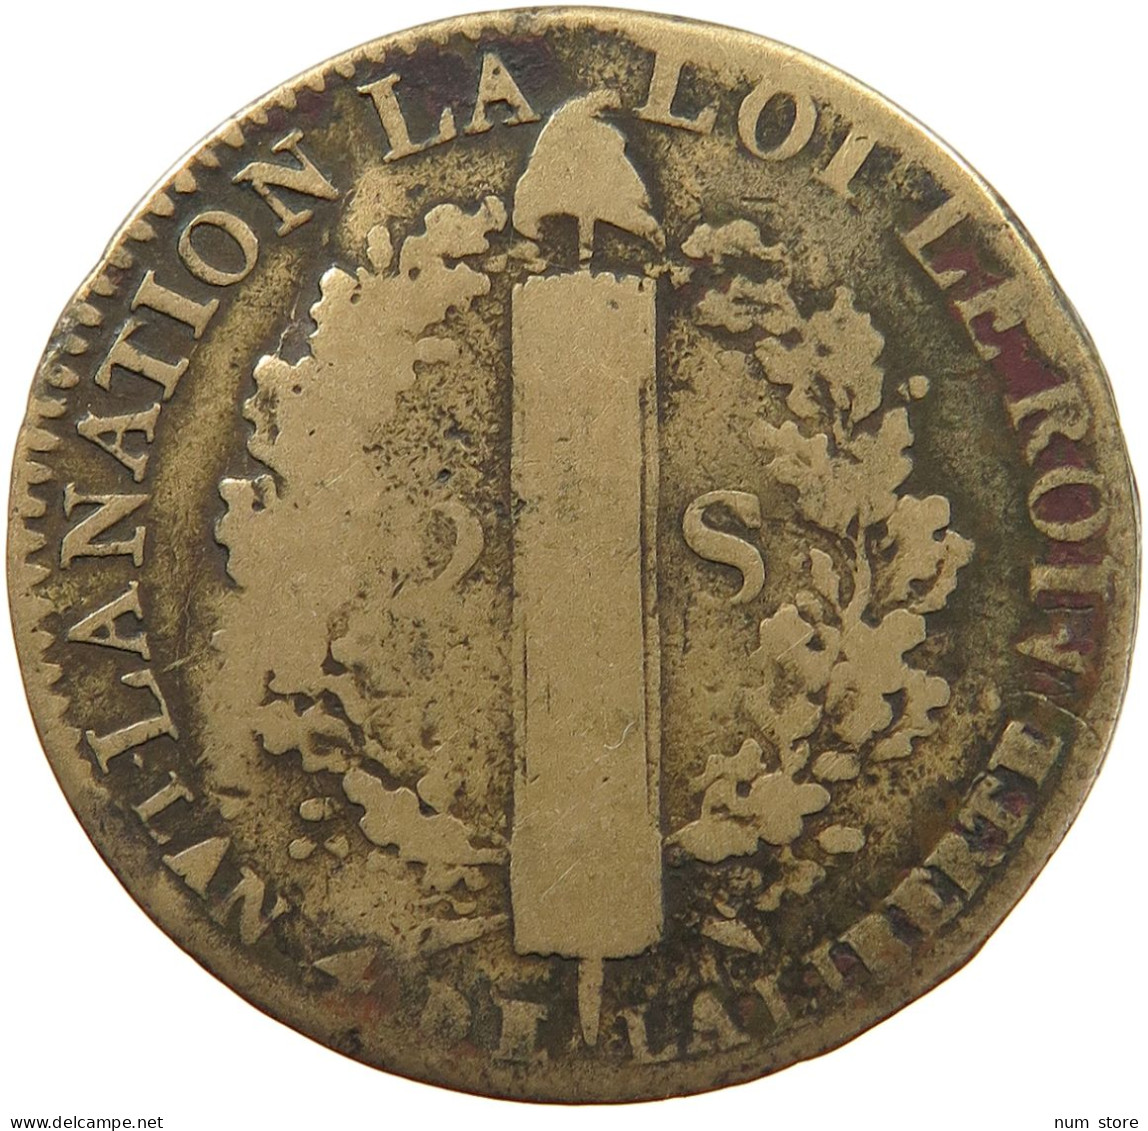 FRANCE 2 SOLS 1792 W Louis XVI. (1774-1793) #t120 0379 - 1791-1792 Constitution (An I)